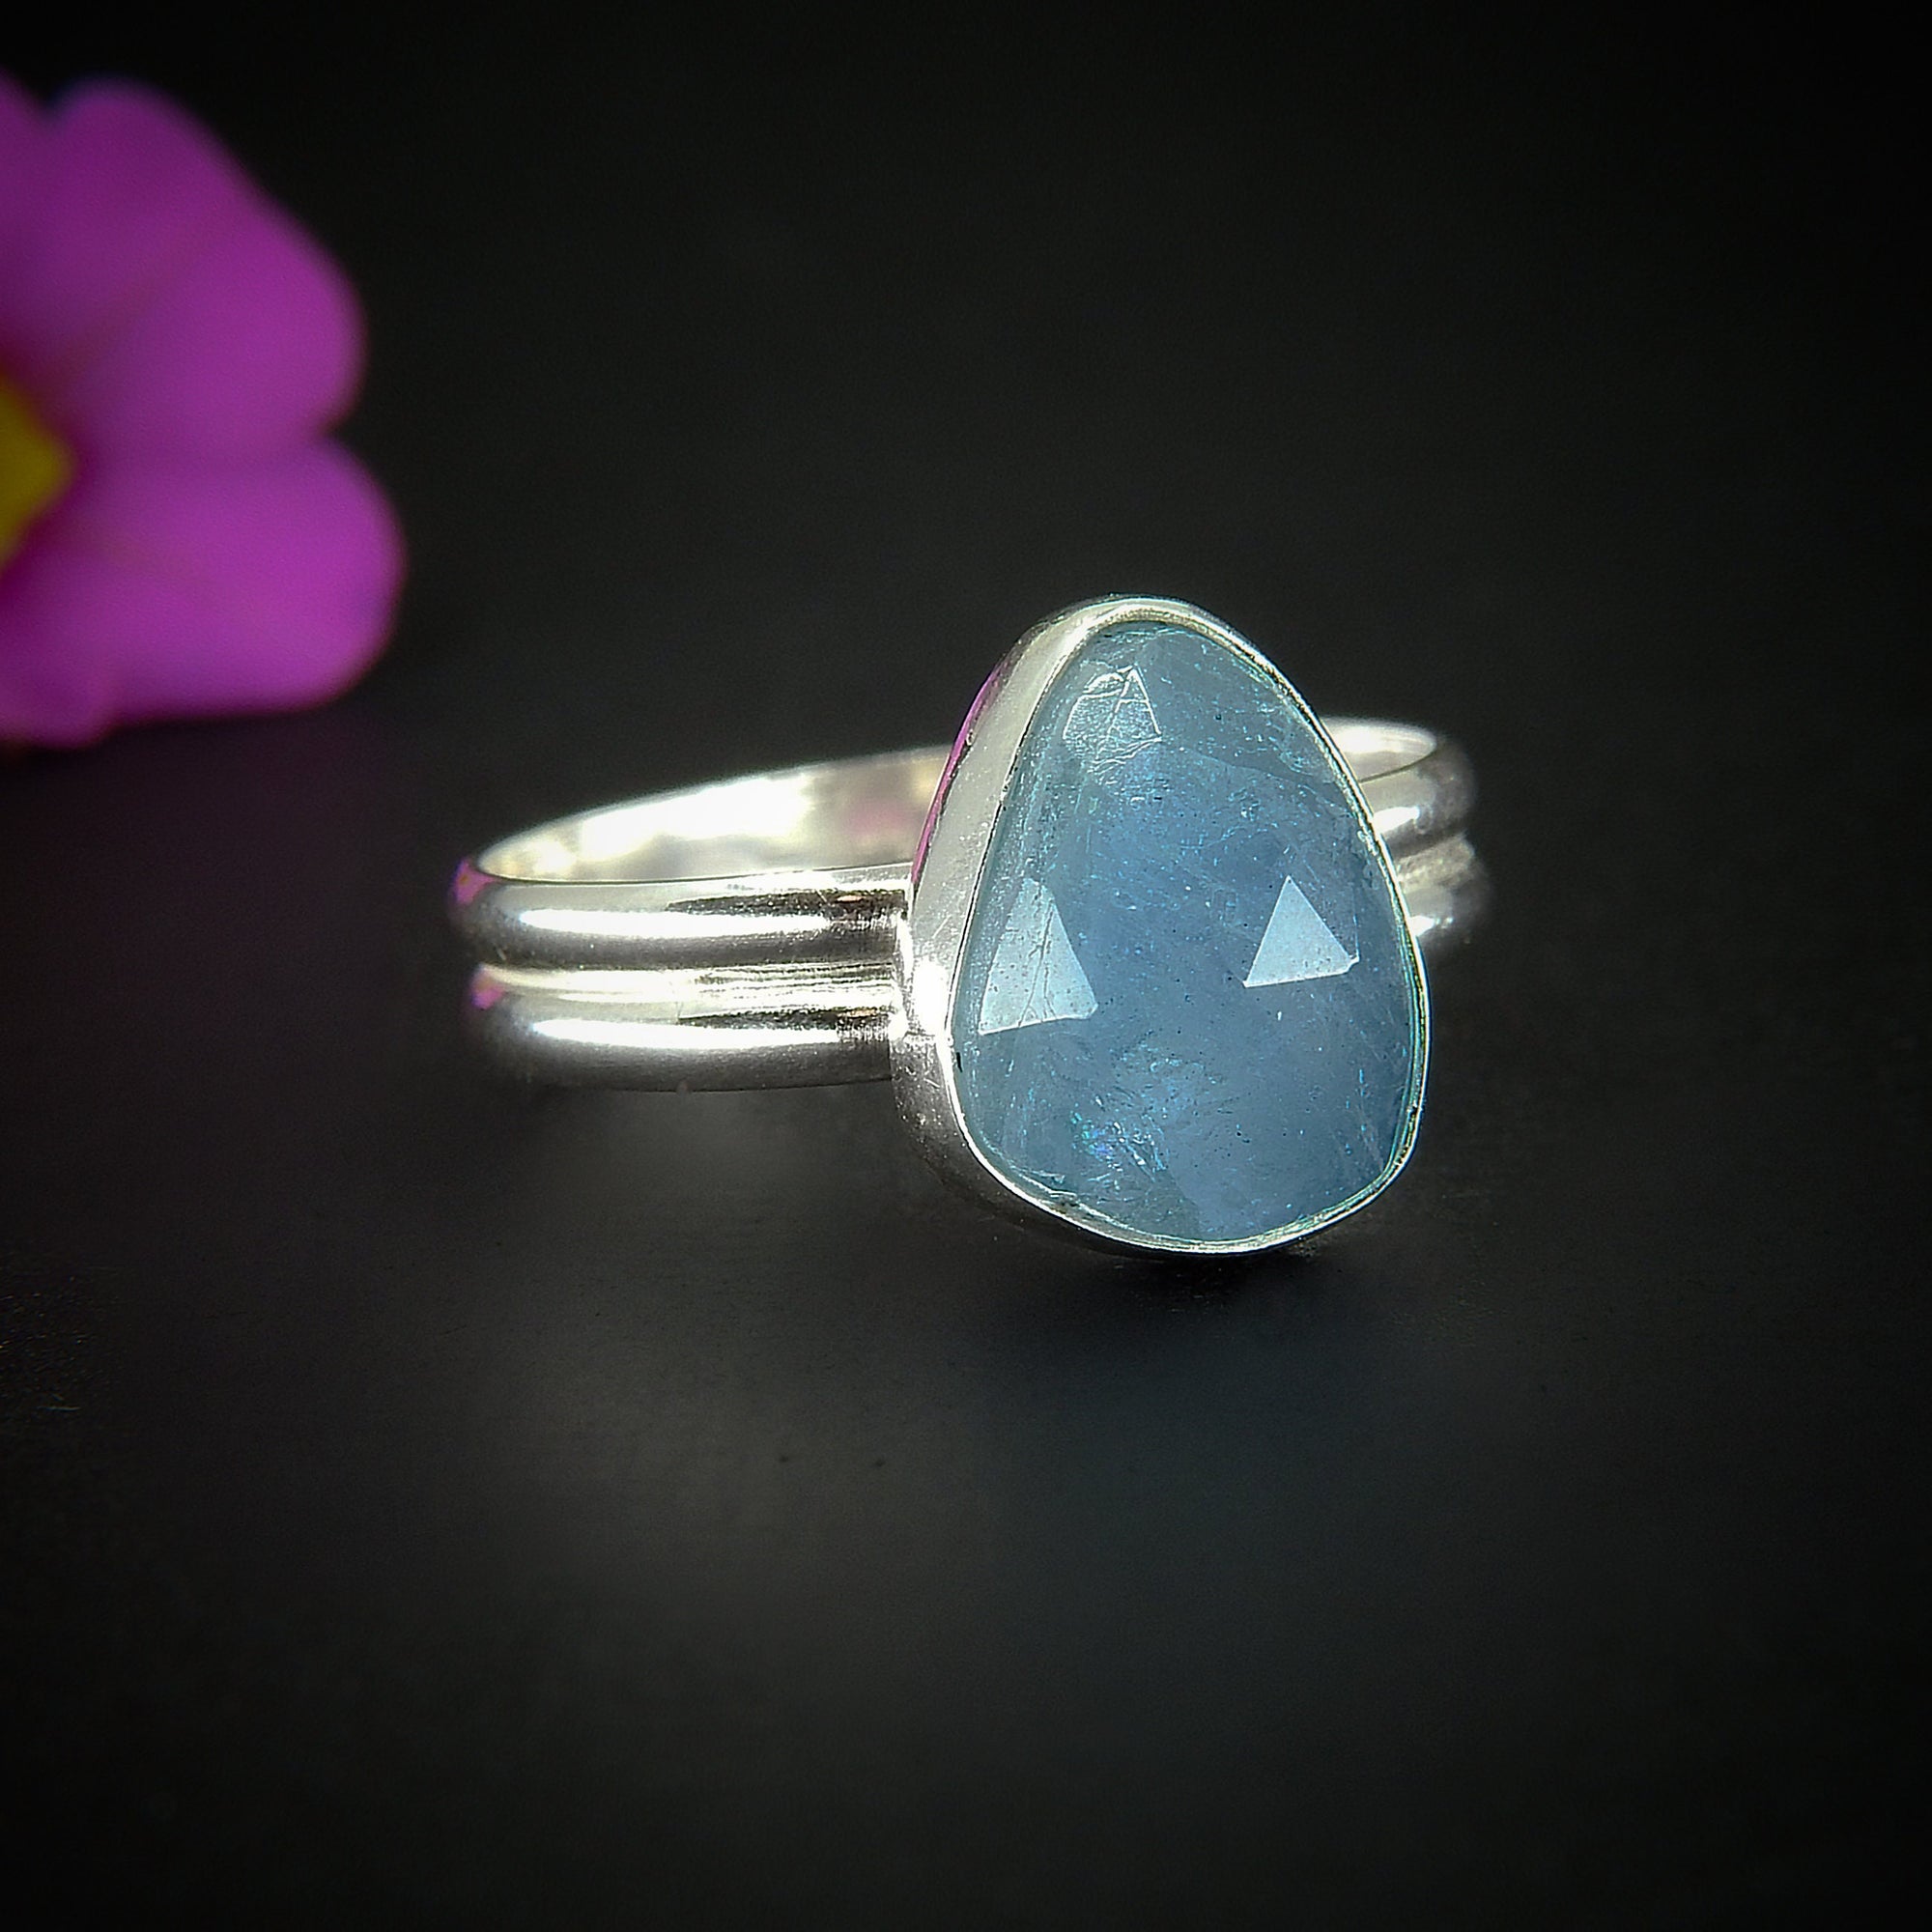 Rose Cut Aquamarine Ring - Size 9 - Sterling Silver - Aquamarine Jewellery - Blue Aquamarine Ring - Unique Aquamarine Statement Ring OOAK